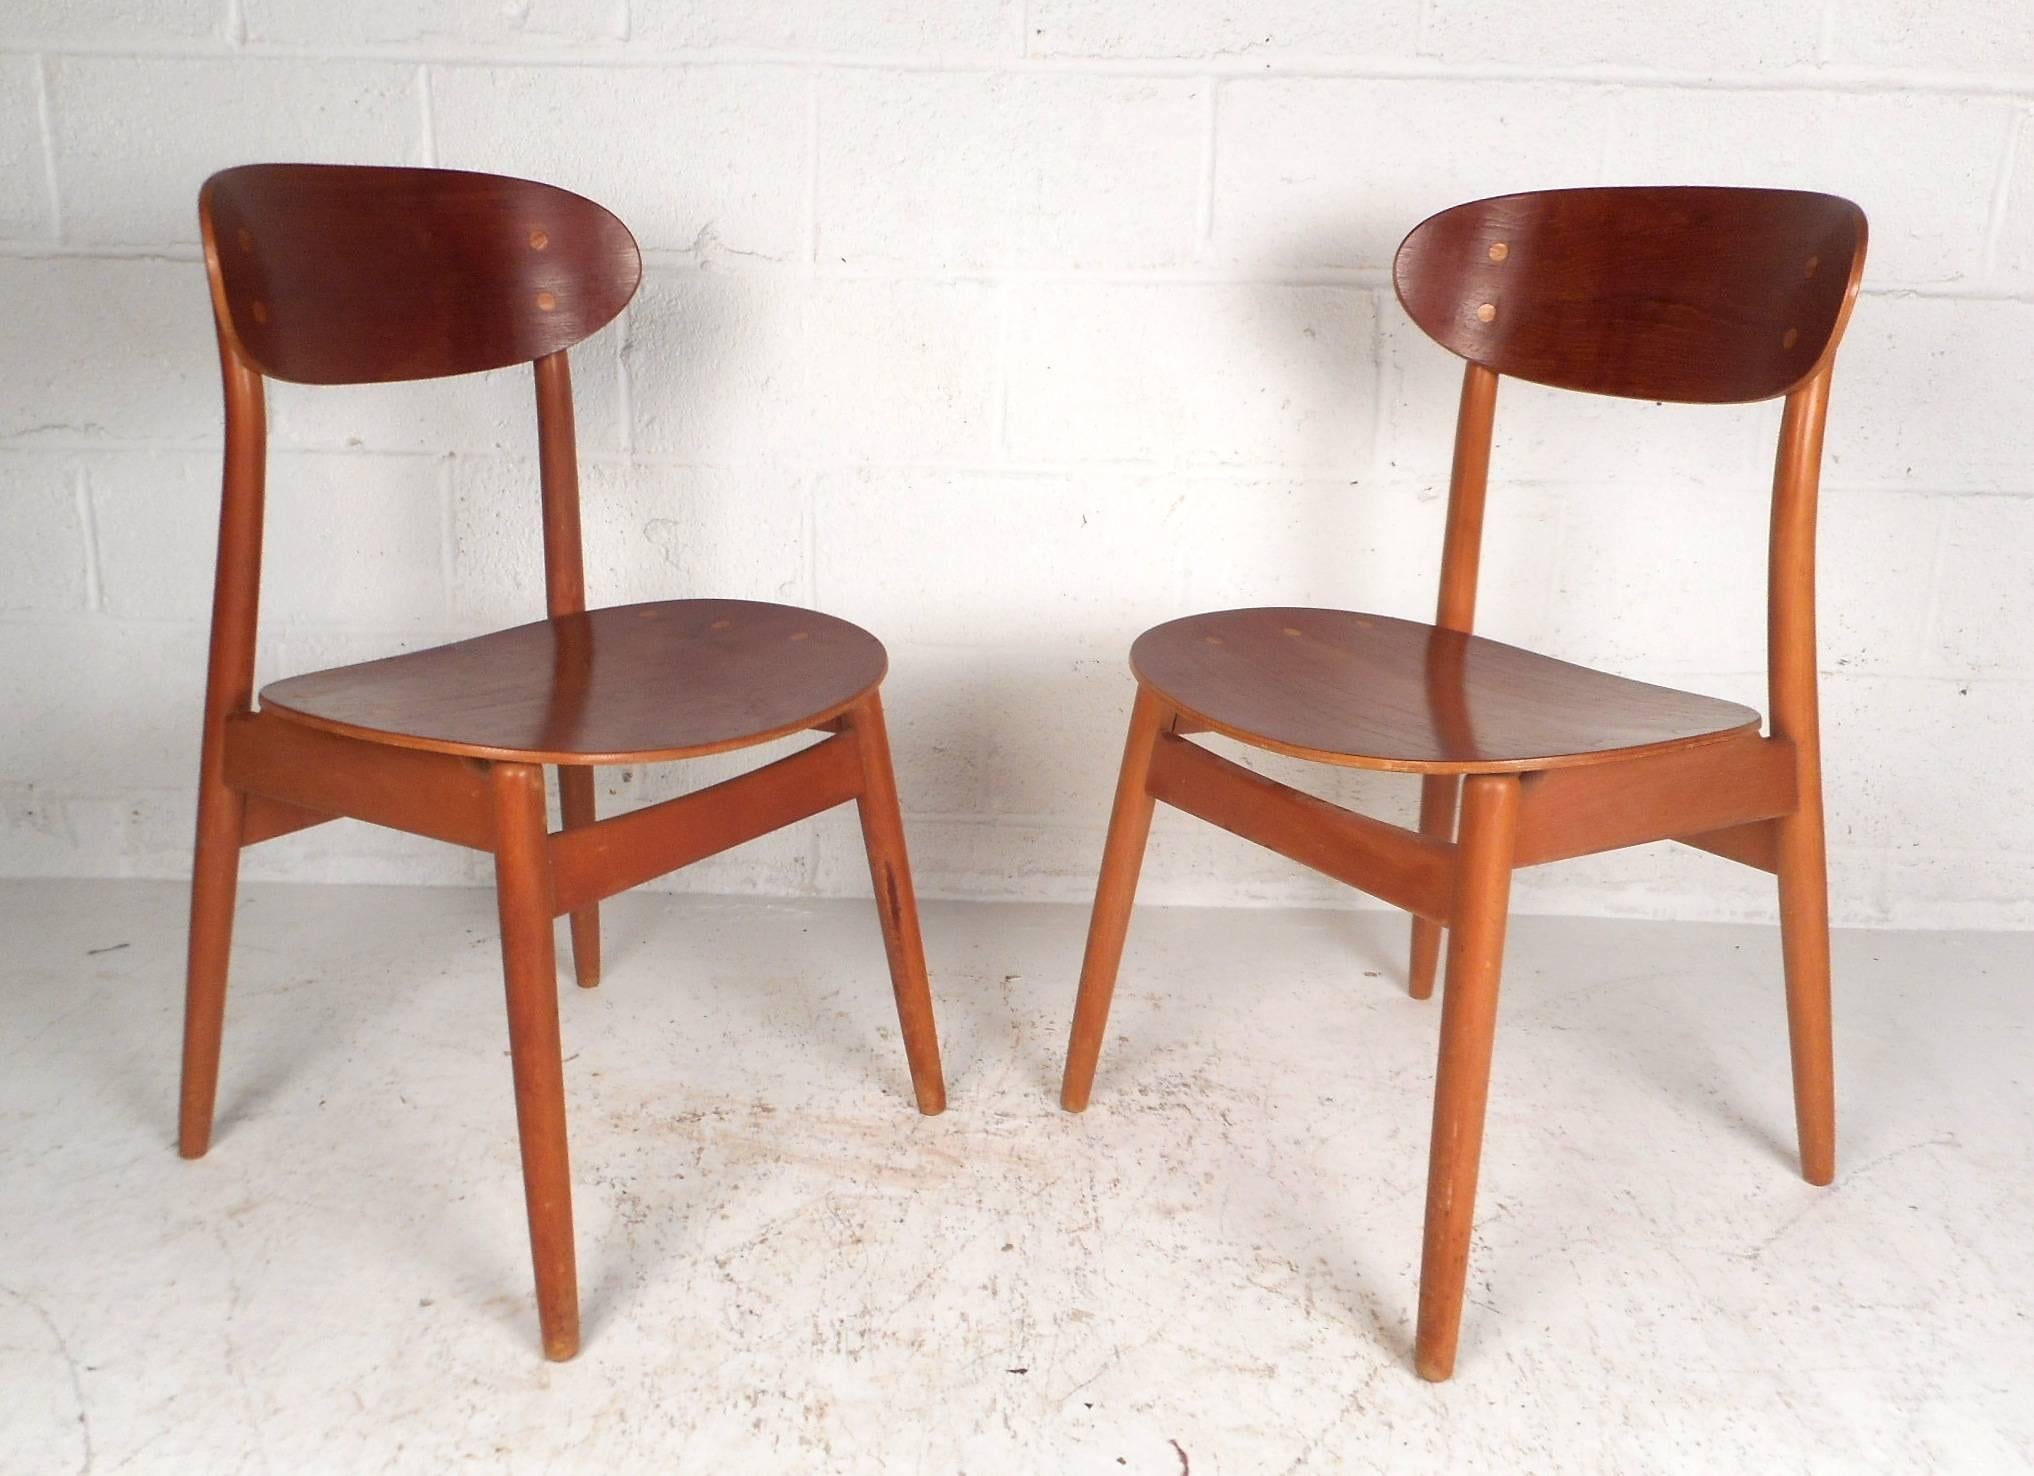 Wonderful pair of vintage modern chairs with curved wing style back rests and contoured seats. Sturdy Danish design with tapered legs and dovetail construction. This unique pair of midcentury side chairs offer plenty of comfort without sacrificing